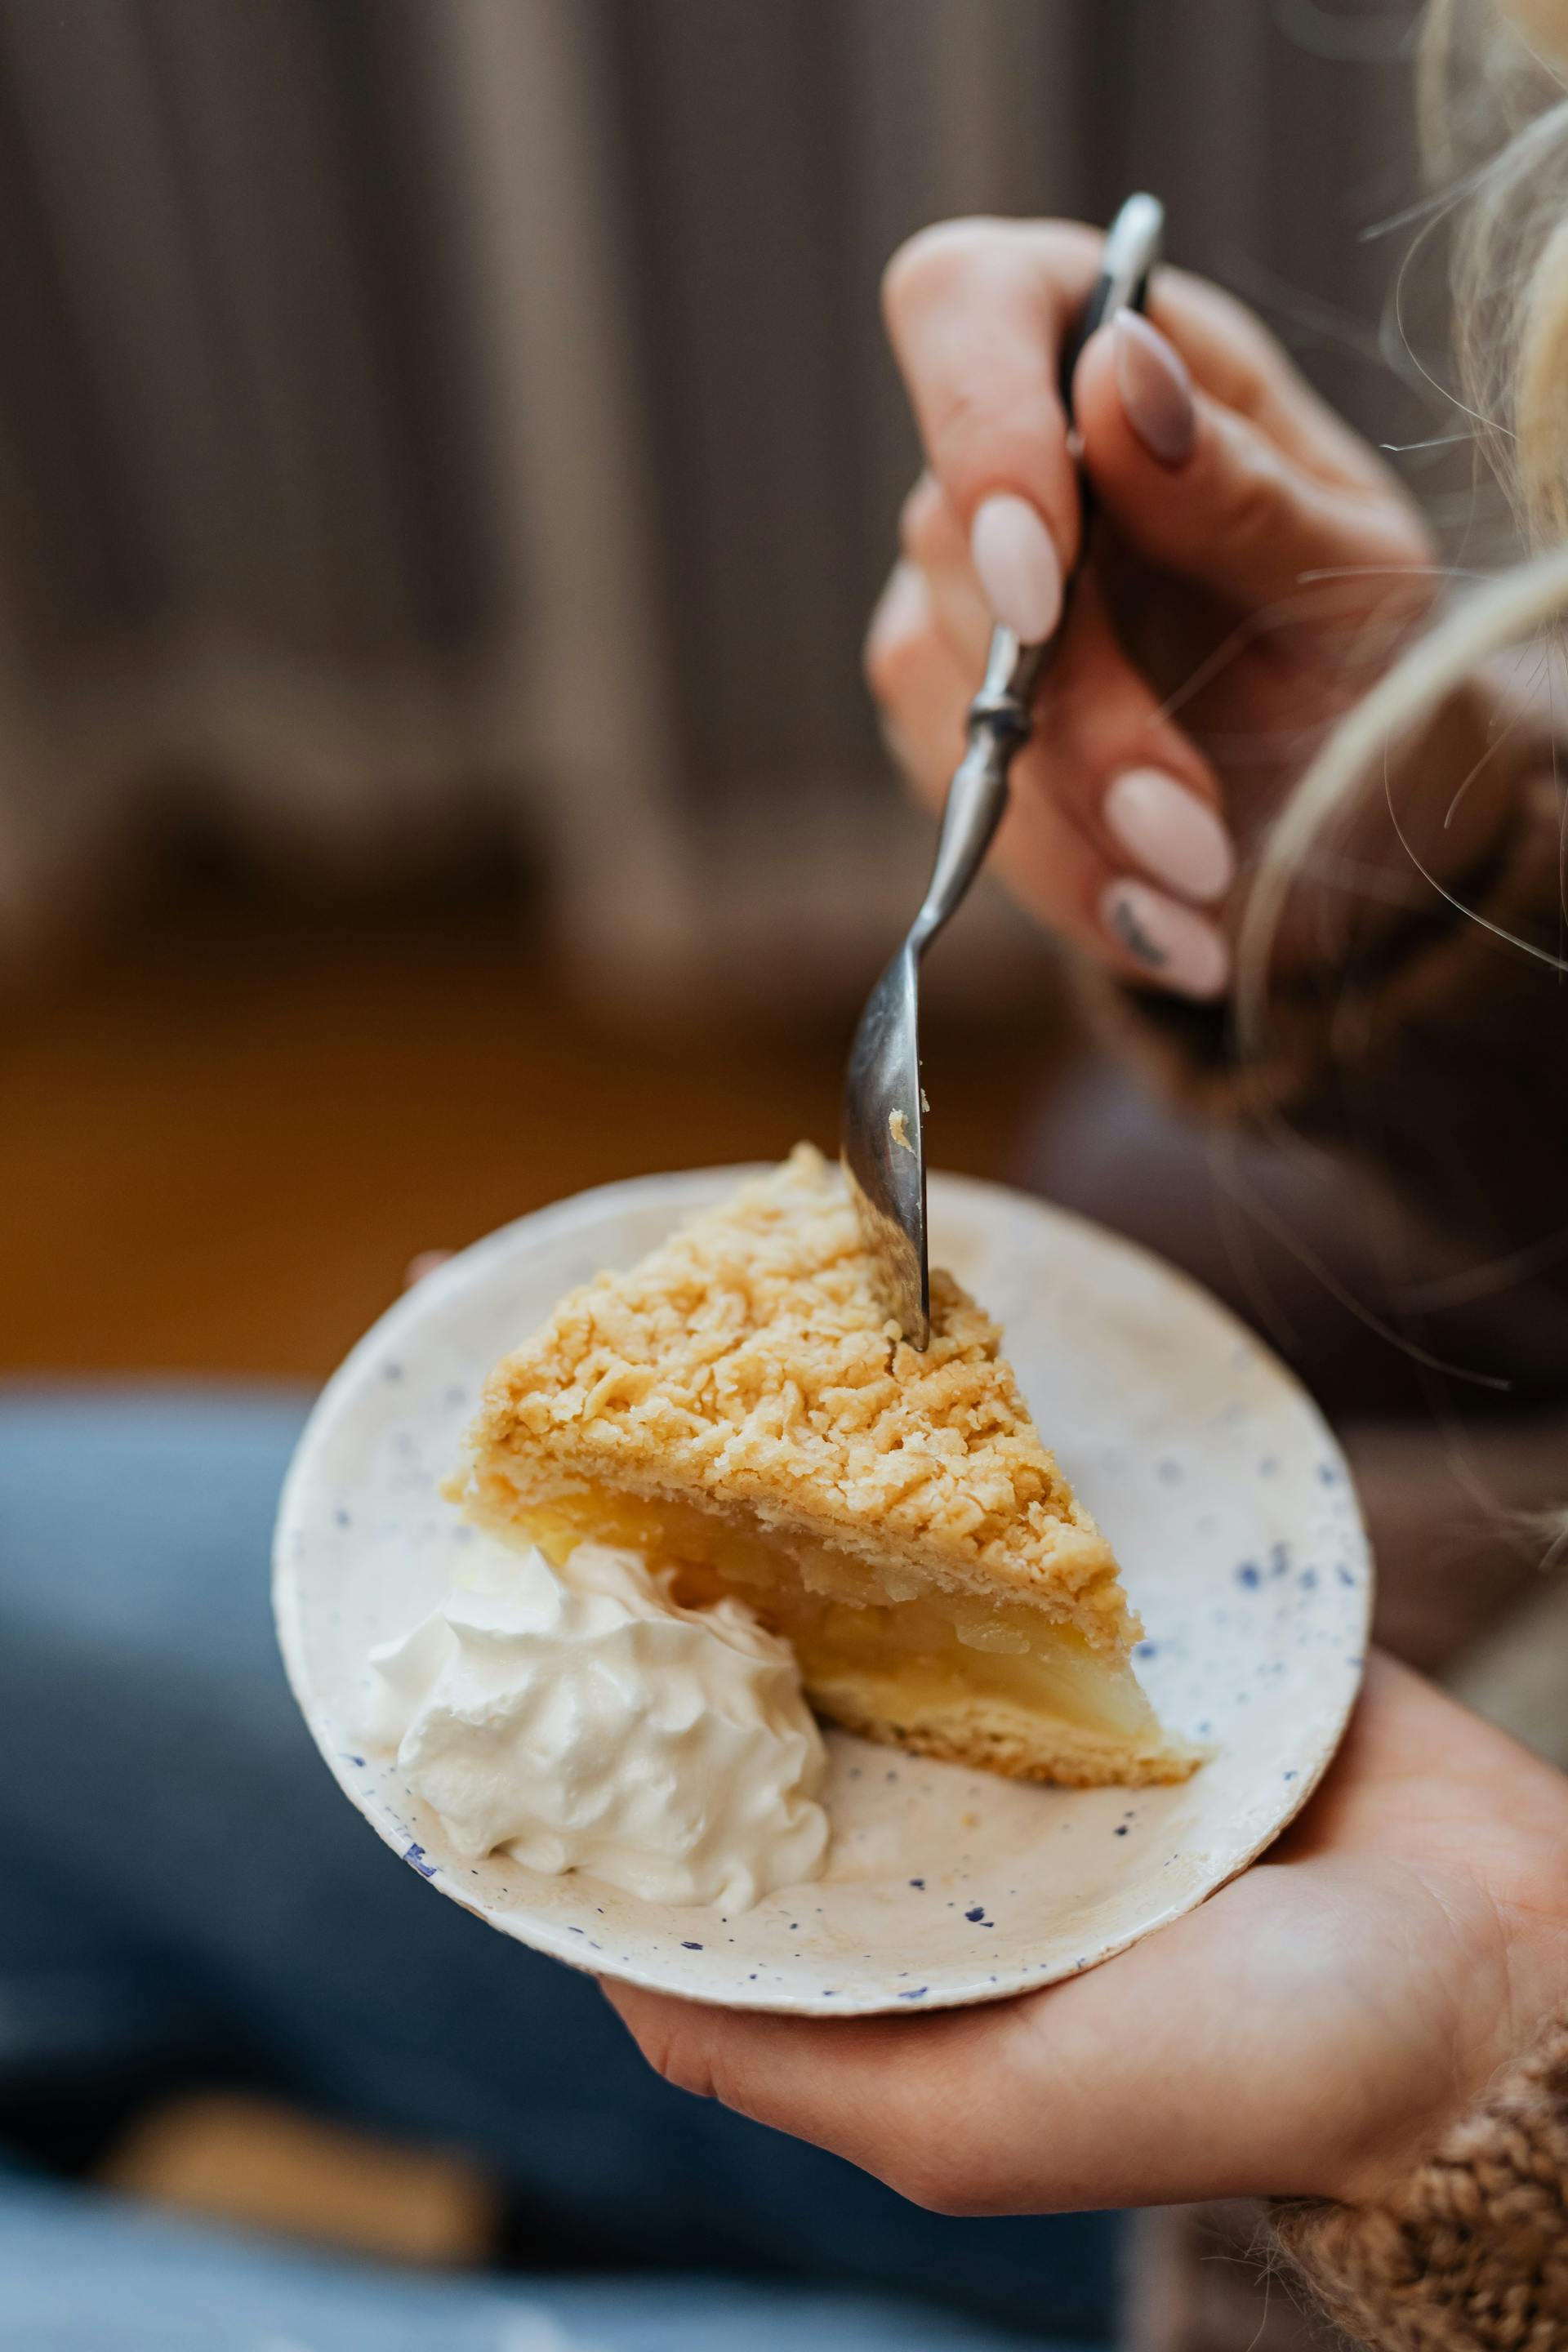 A woman holding a slice of pie | Source: Pexels